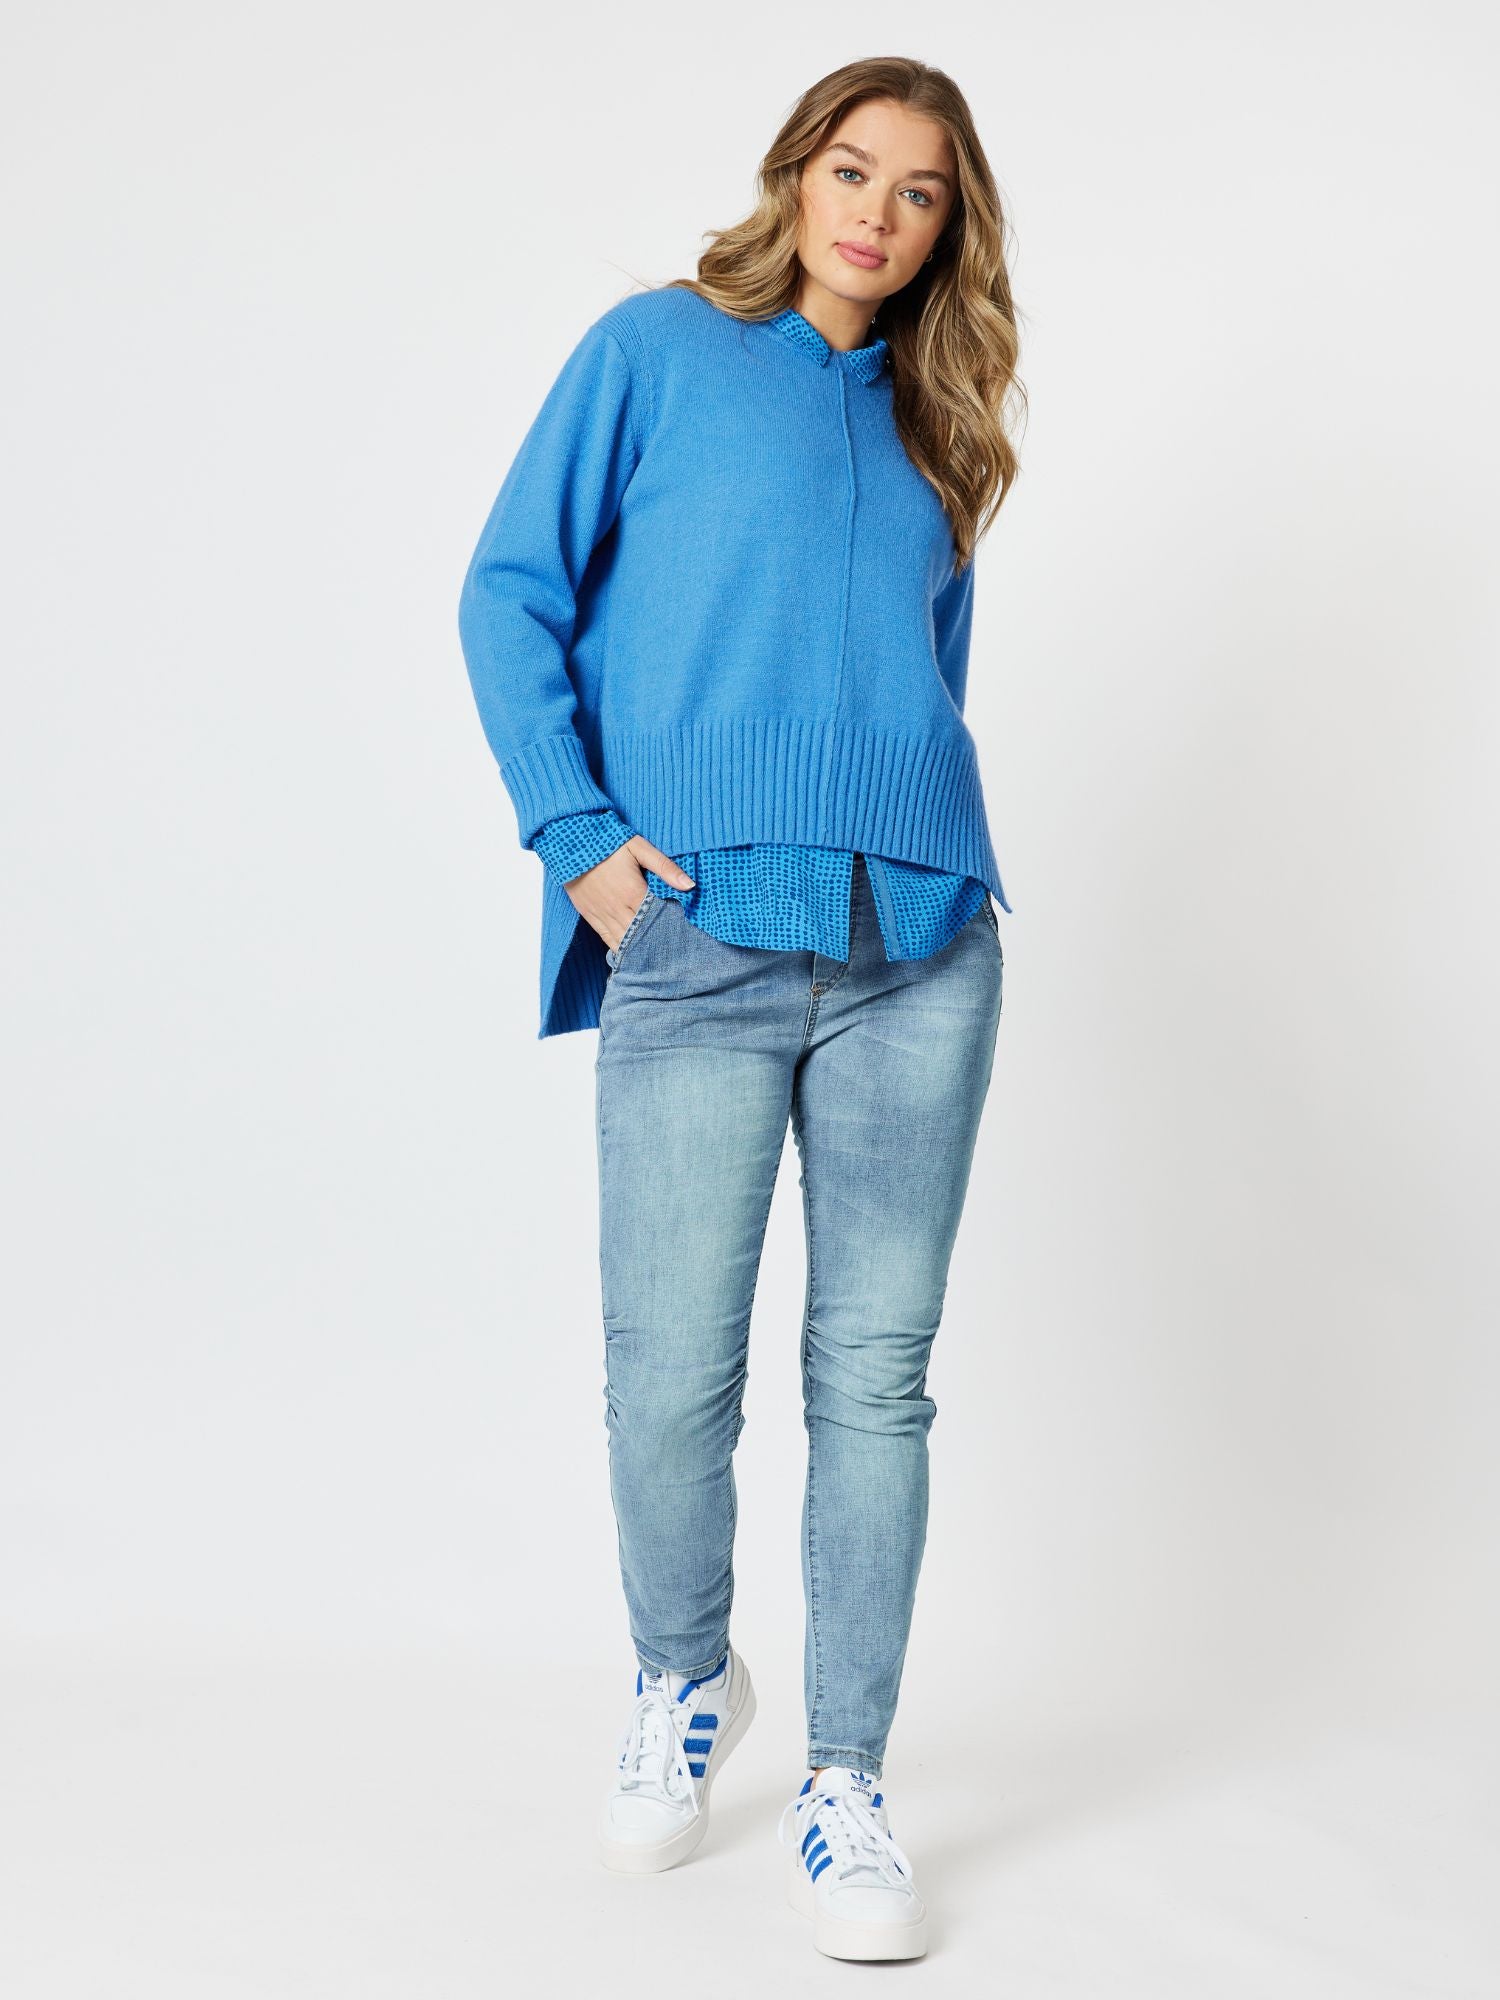 Madeline High Lo Knit Top Top - Blue